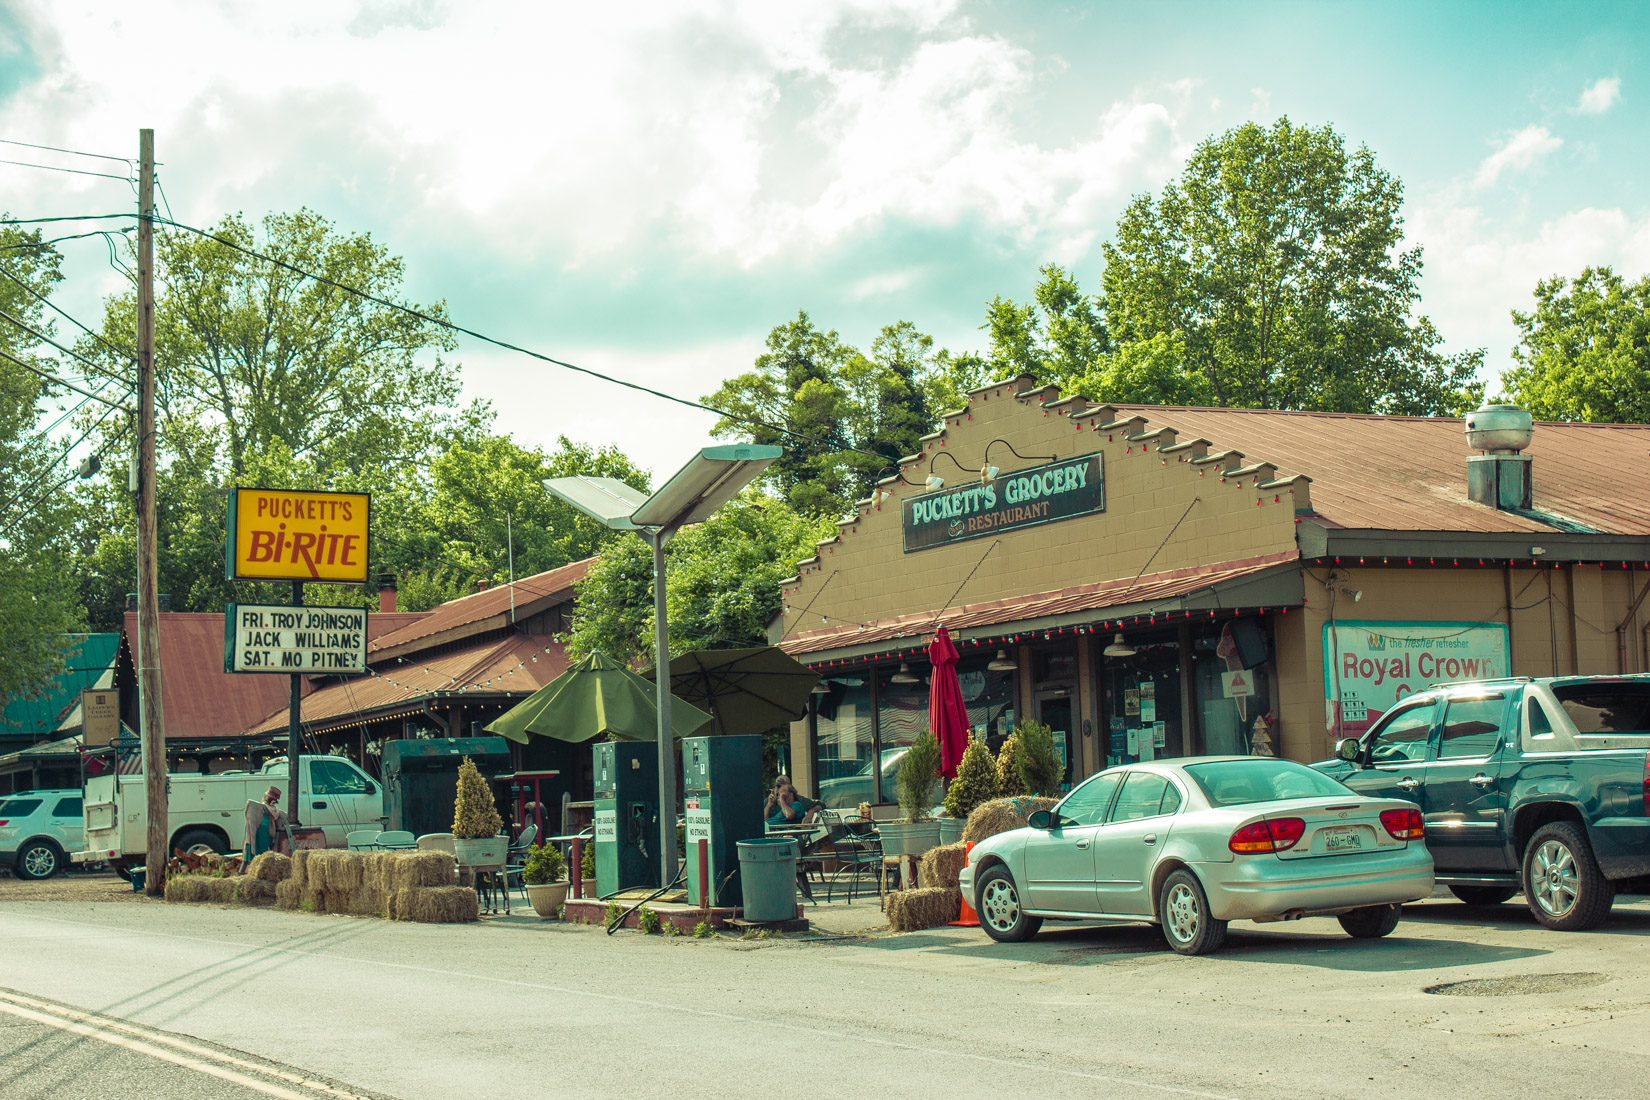 Leiper's Fork Pucketts exterior